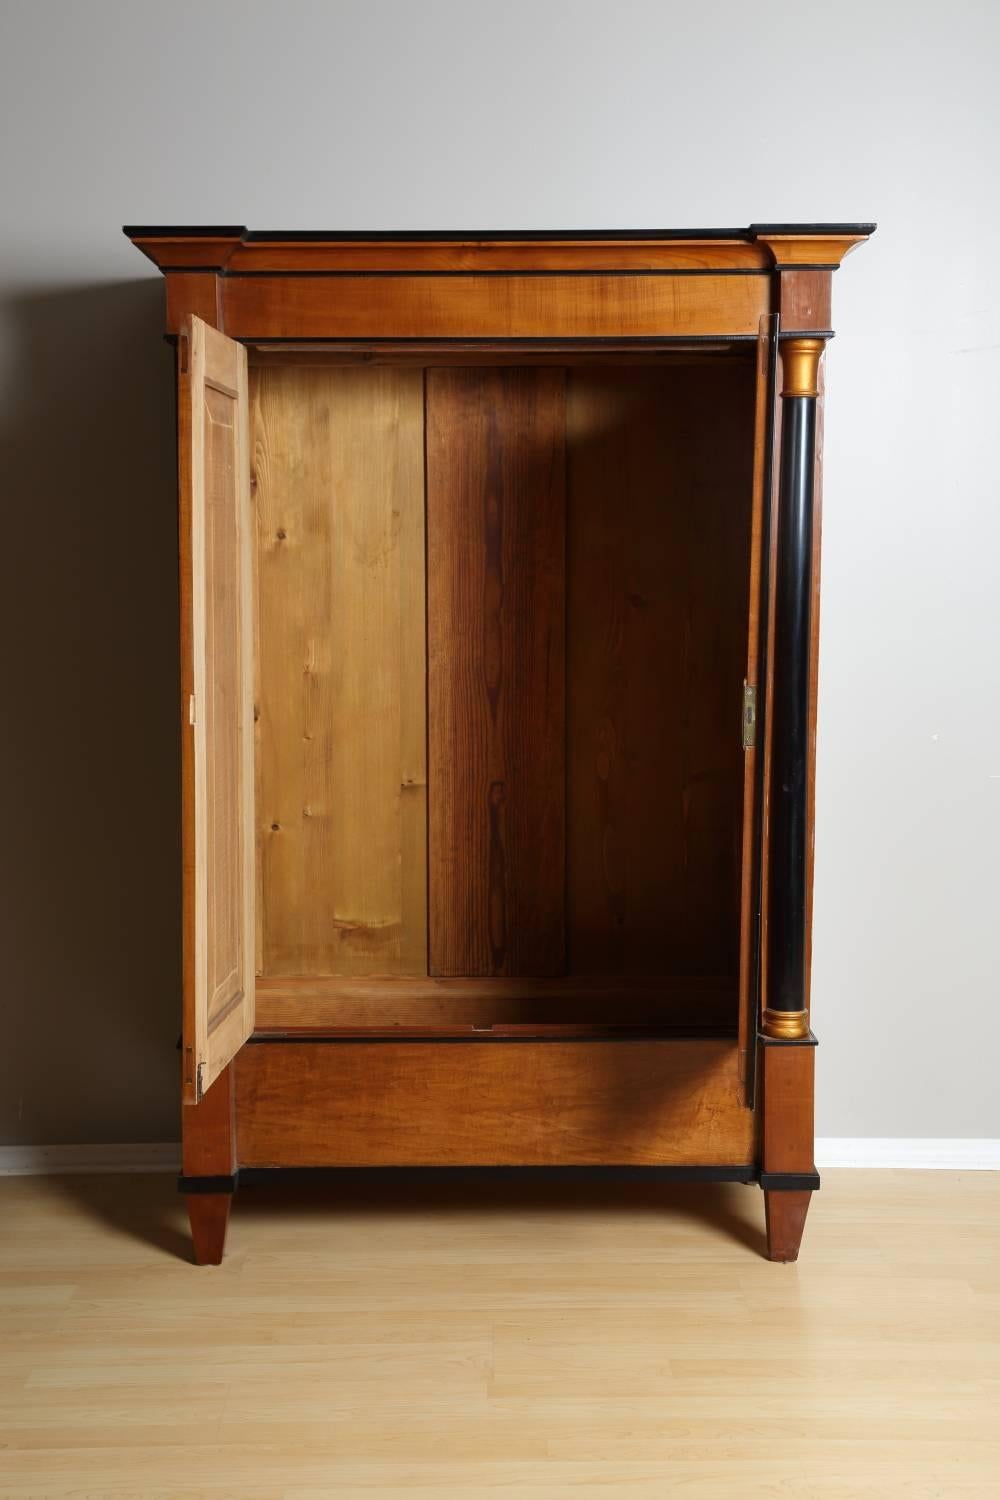 Rare Biedermeier Pearwood Wardrobe, circa 1820 In Excellent Condition For Sale In Chicago, IL